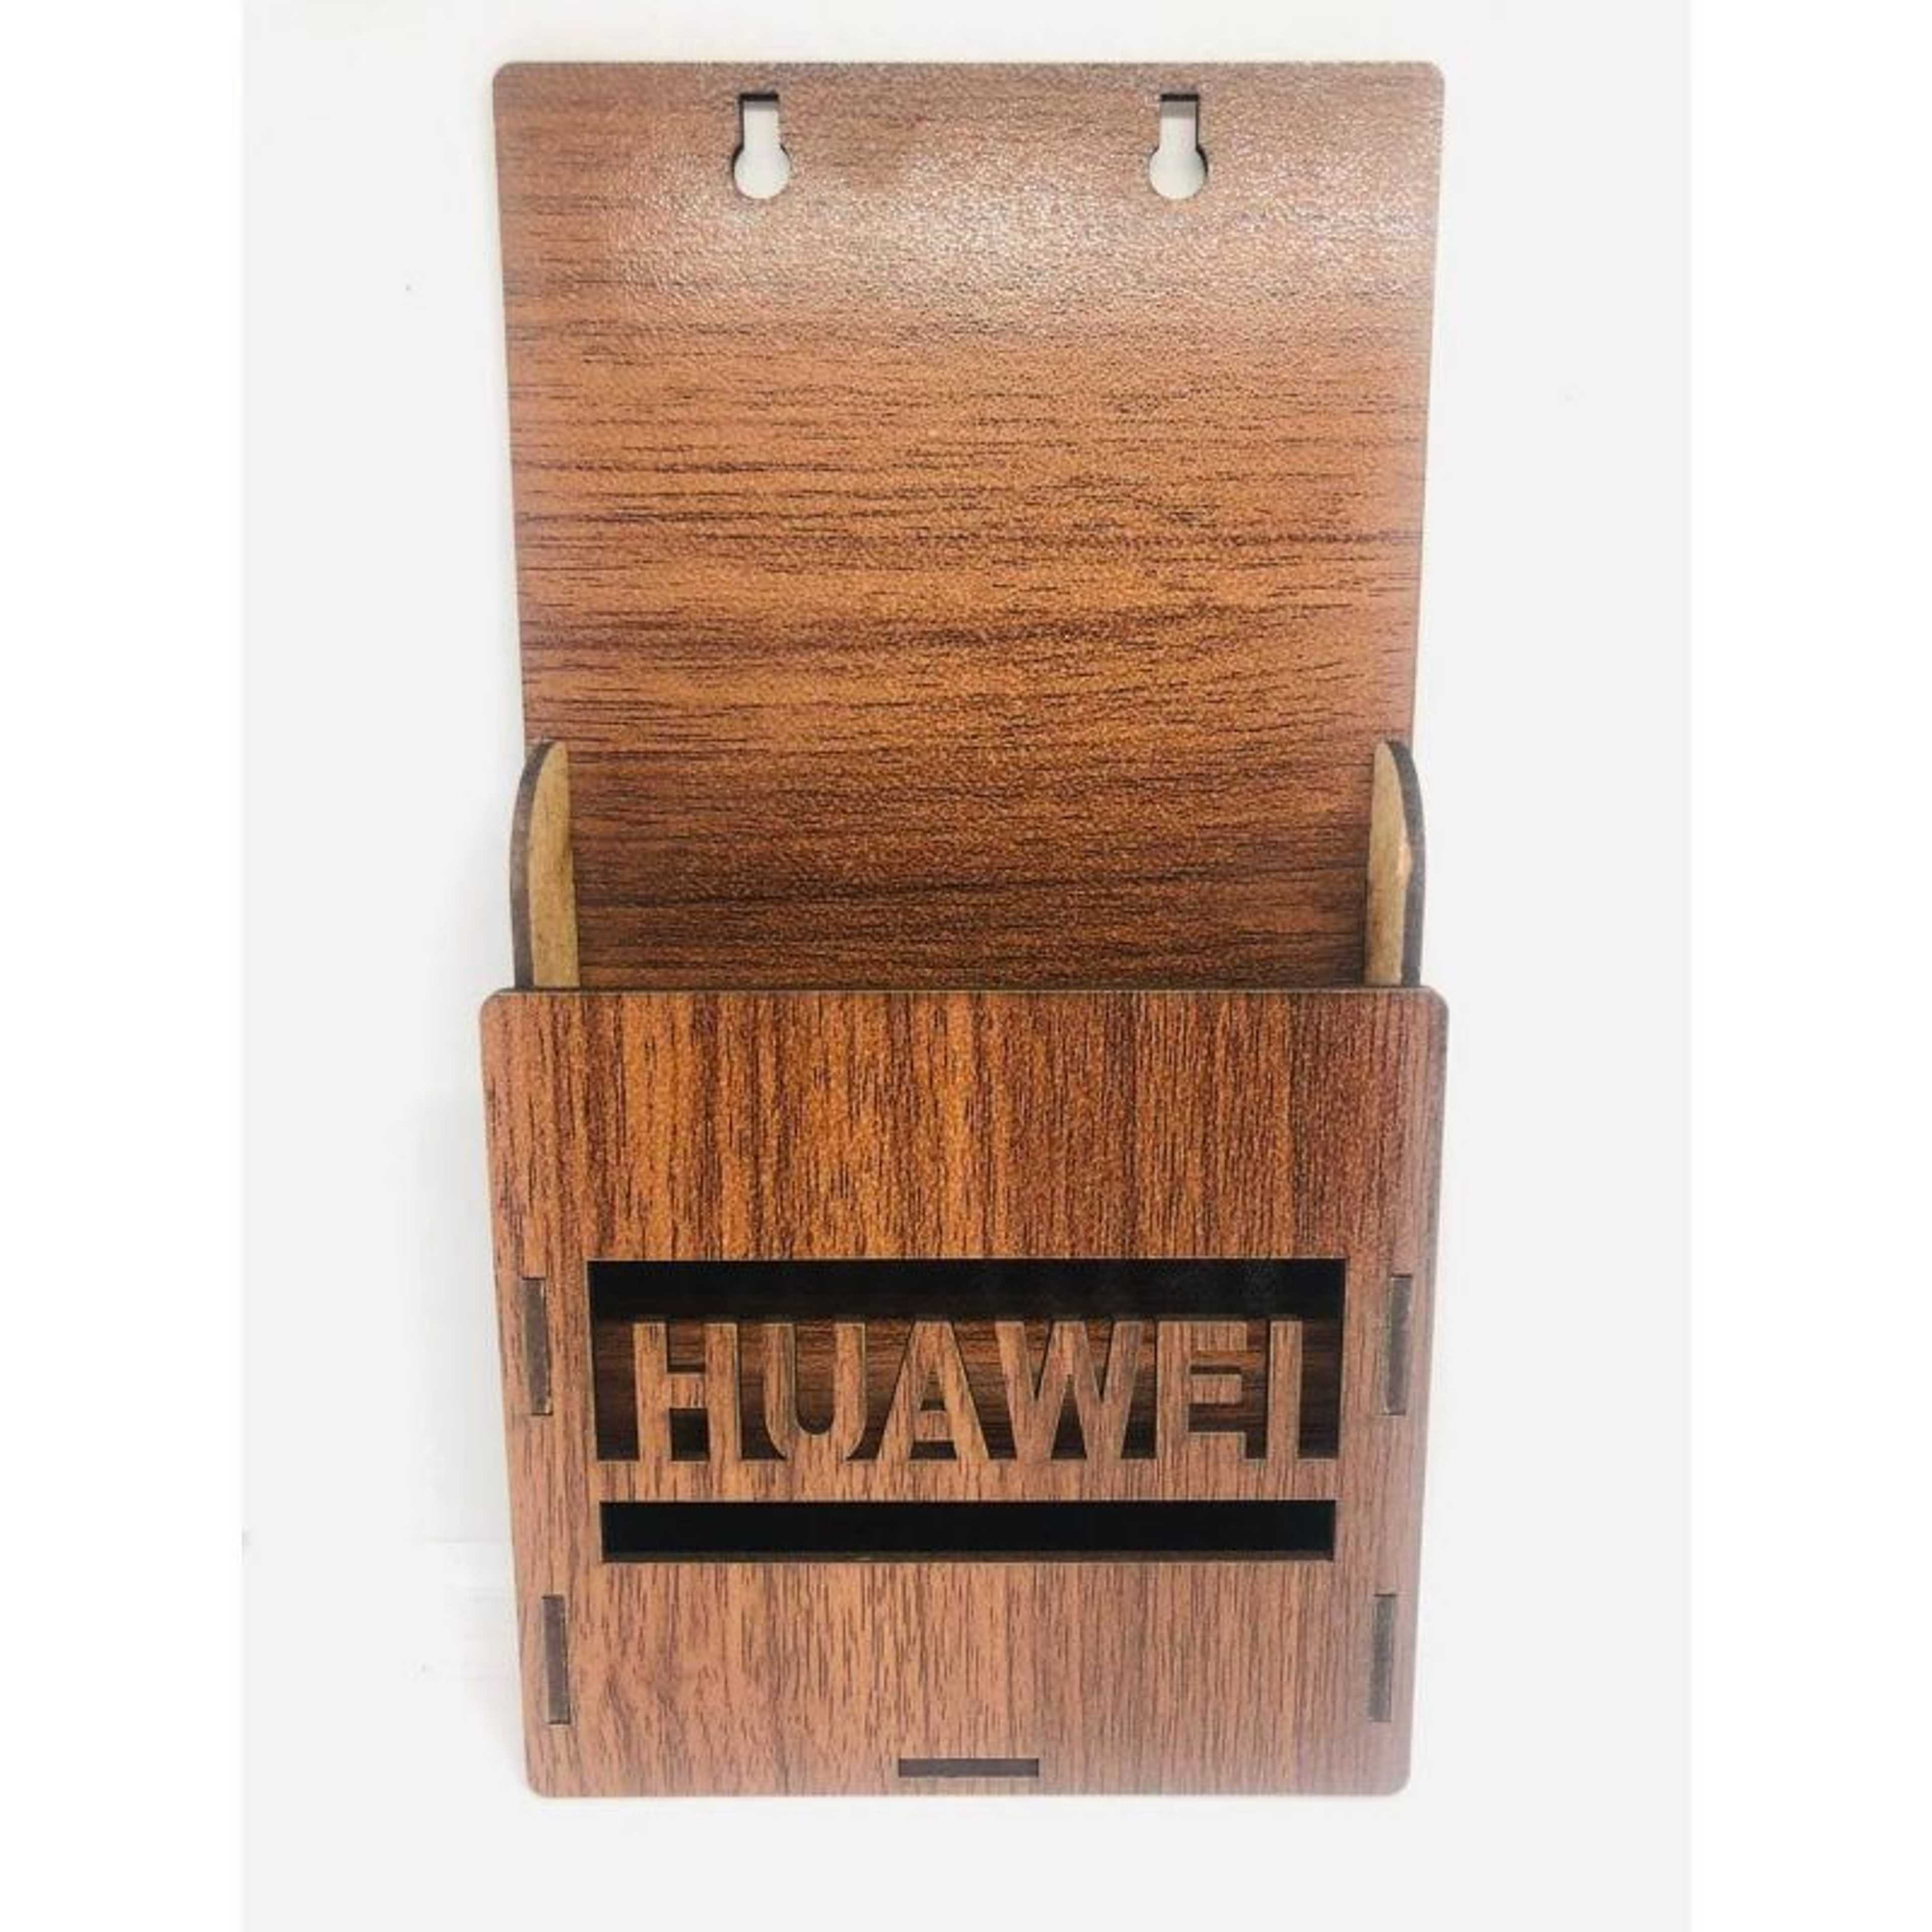 Wooden Mobile Wall Bracket - Wooden Mobile Wall Holder - Decoration phone holder for charging - Wall charging case - For safety of mobile